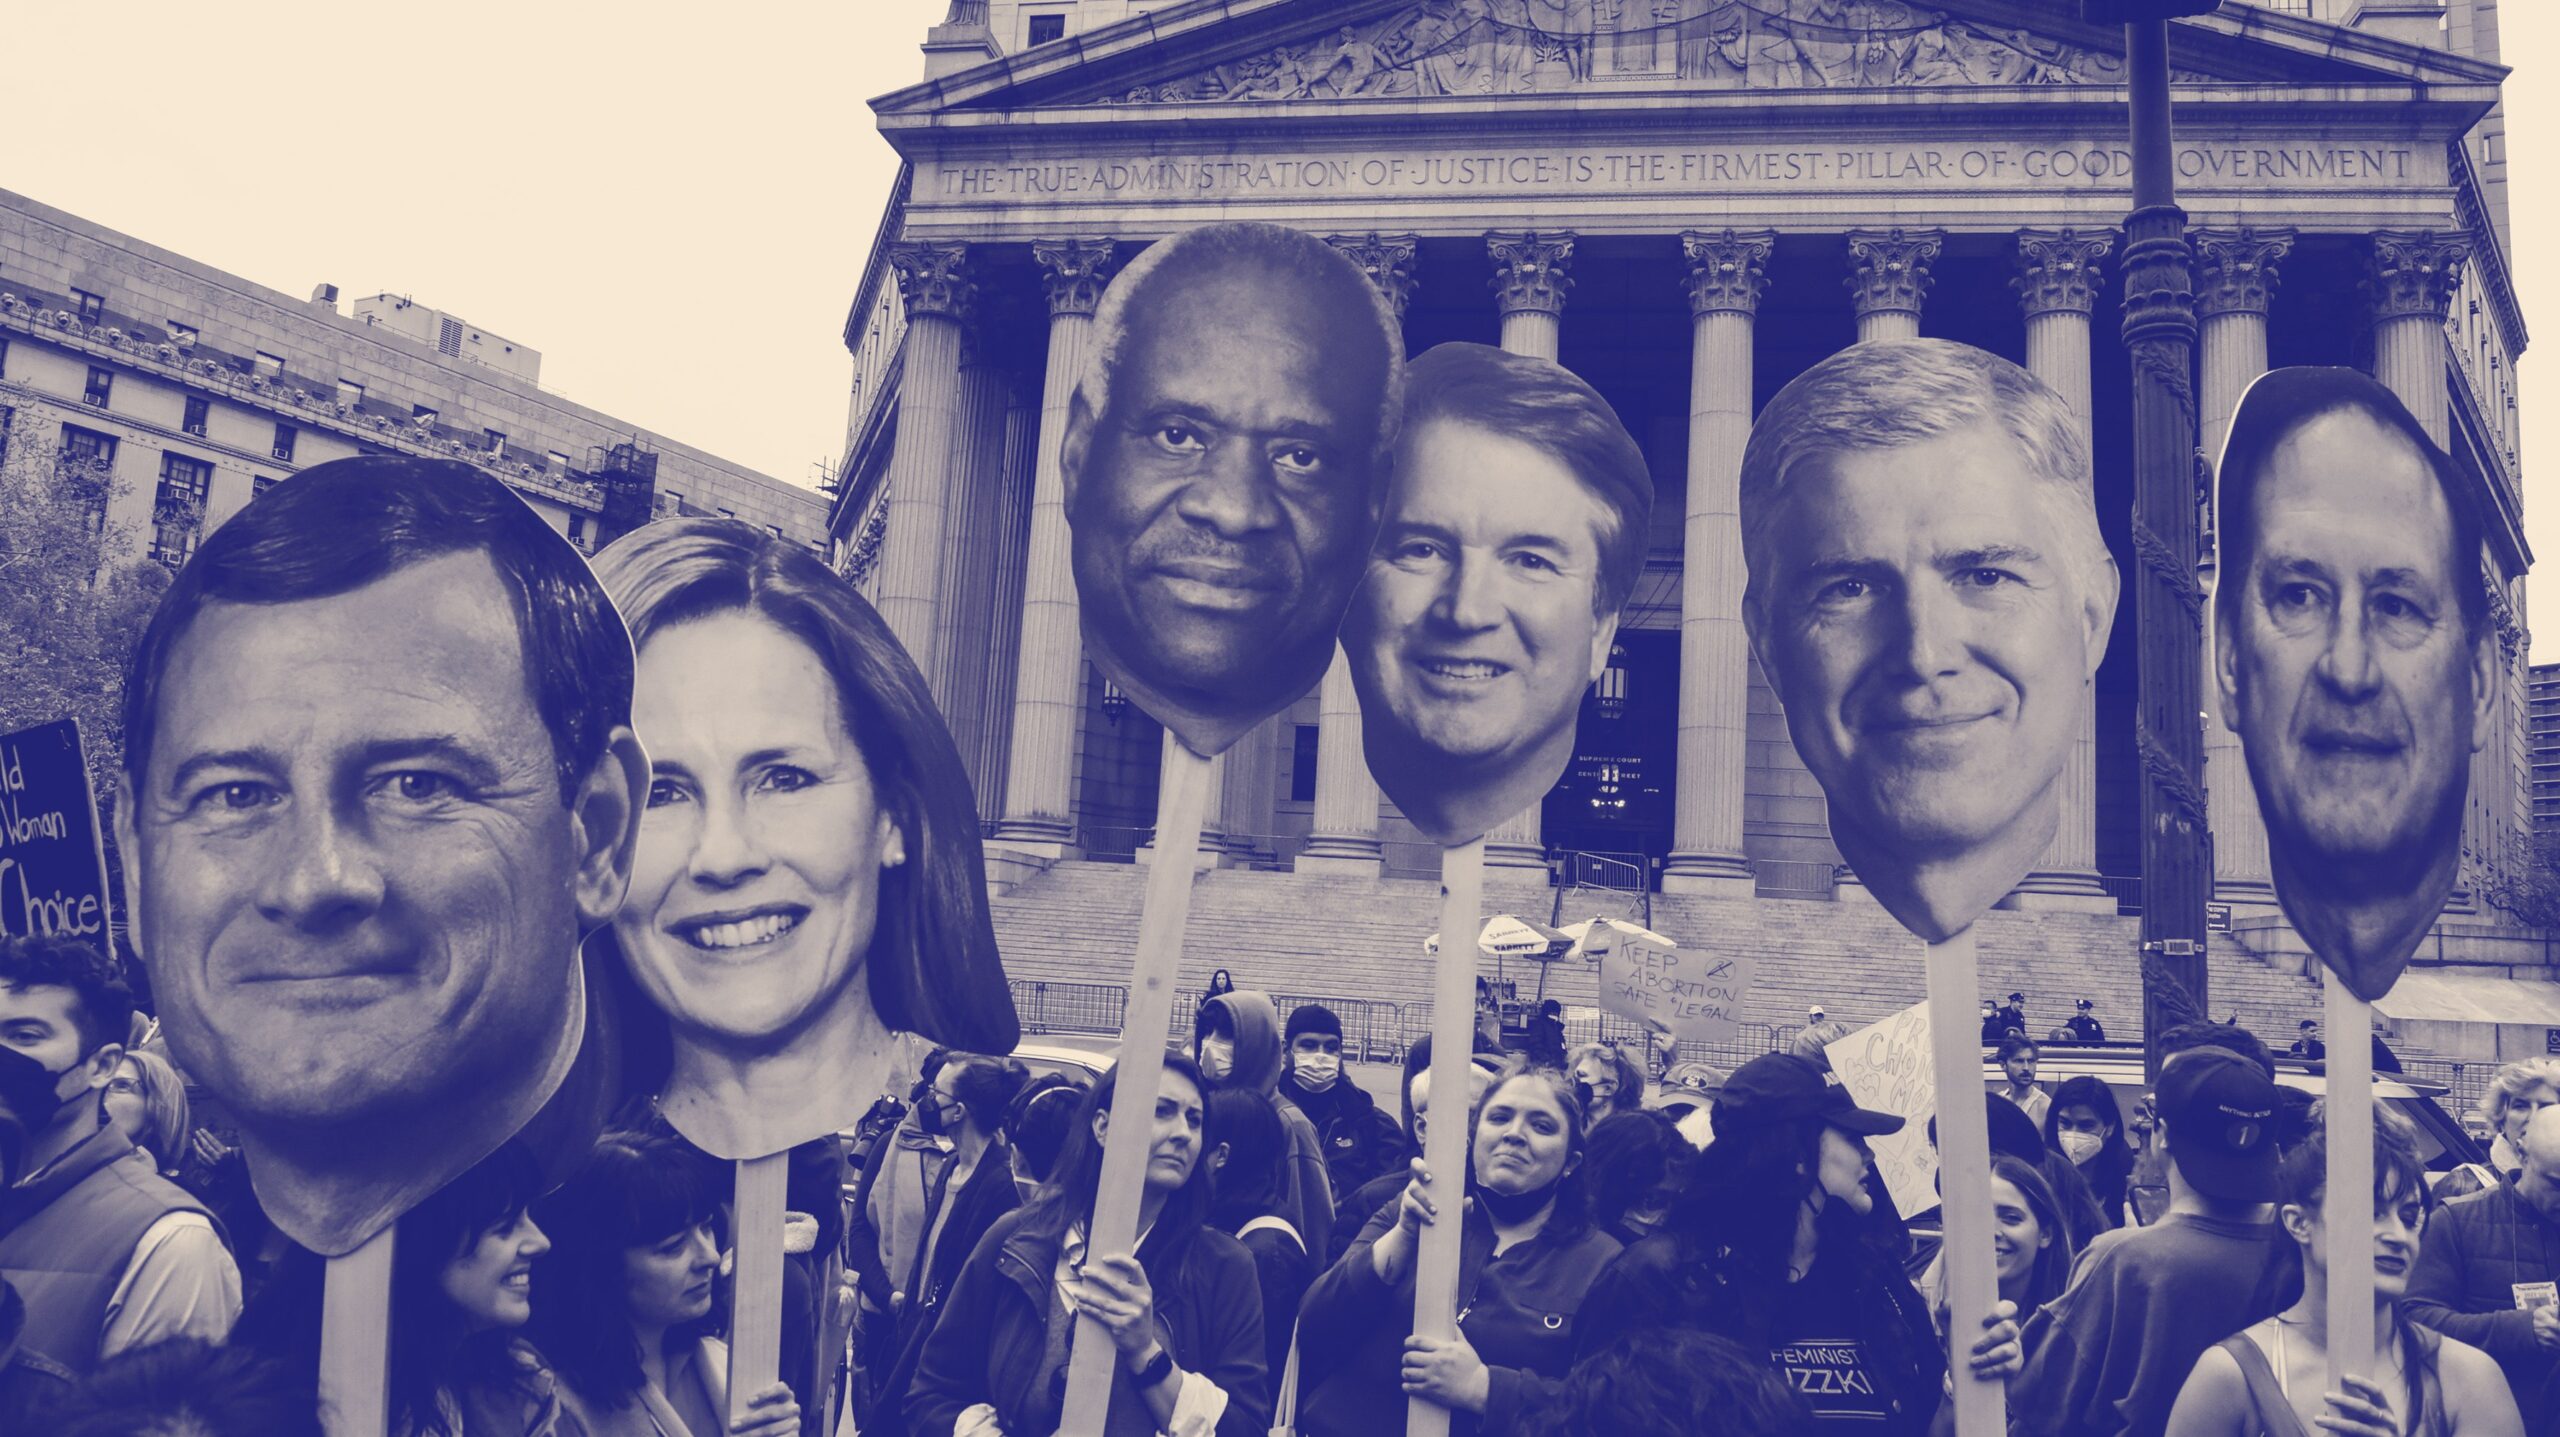 The Supreme Court’s History of Protecting the Powerful